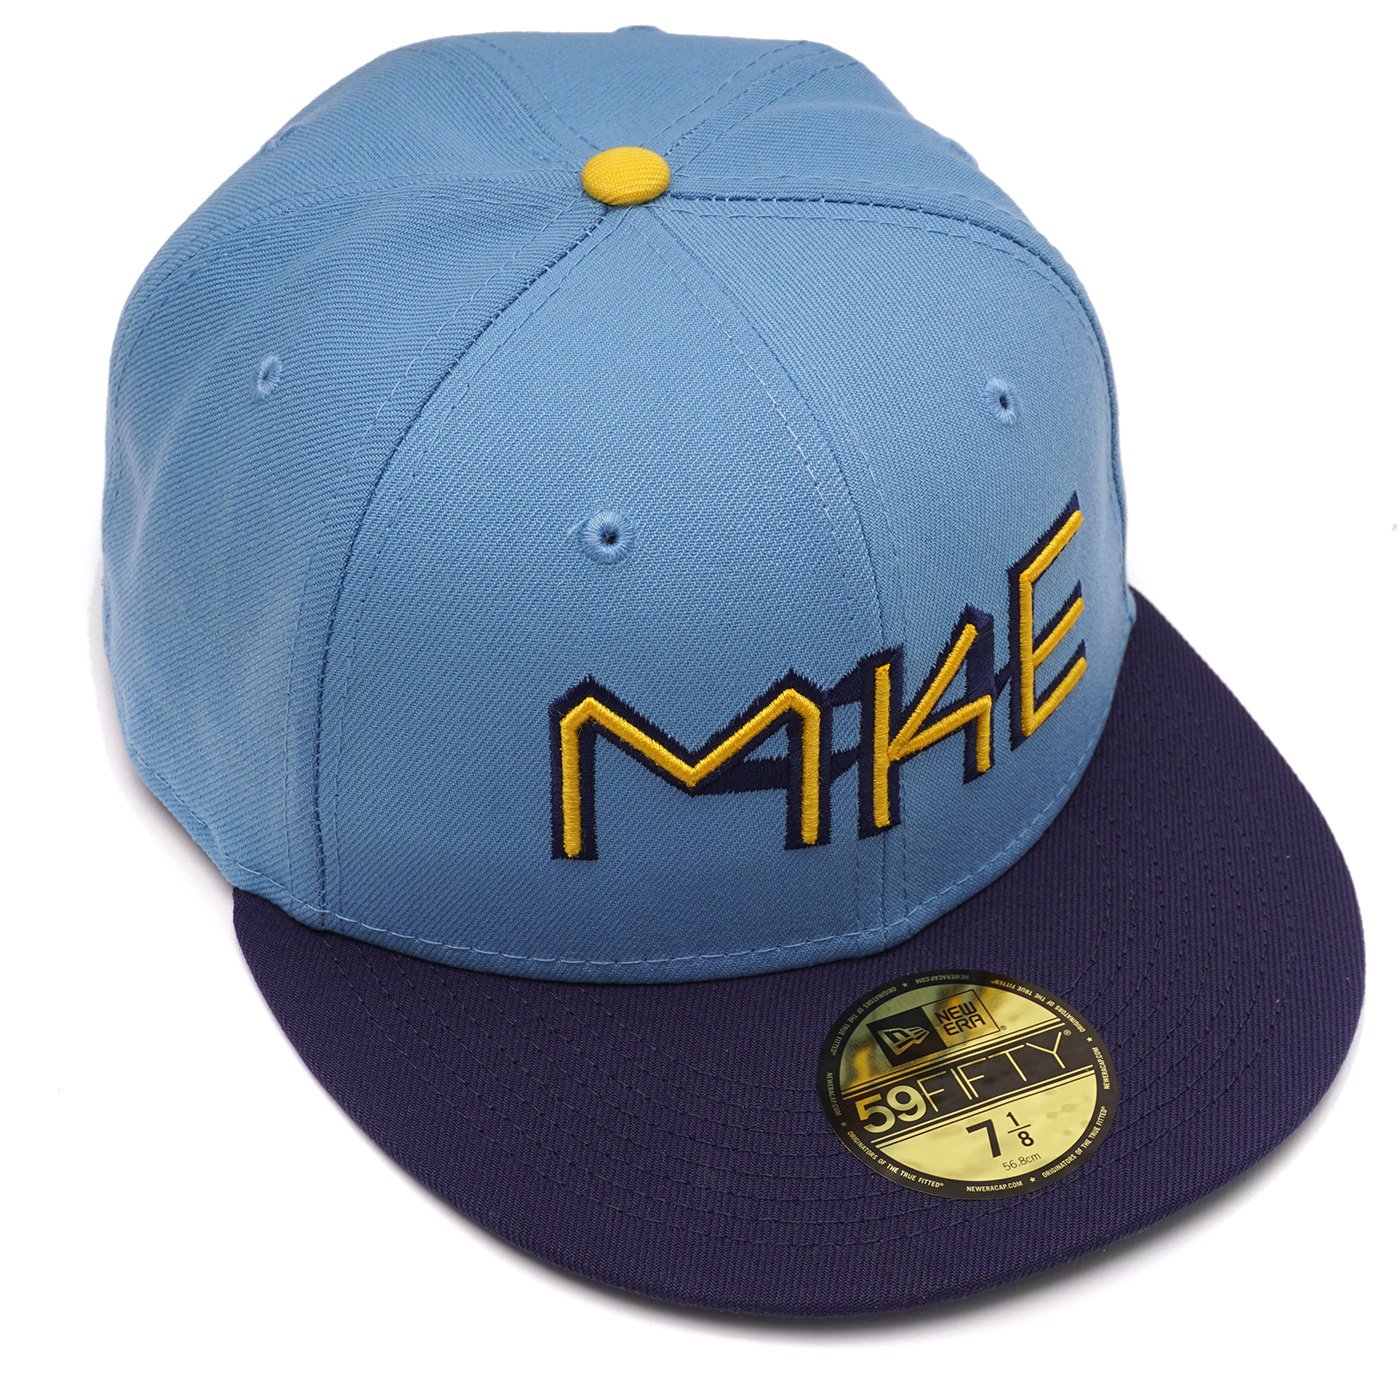 New Era 9FIFTY-BREWER Milwaukee Brewers City Connect Snapback